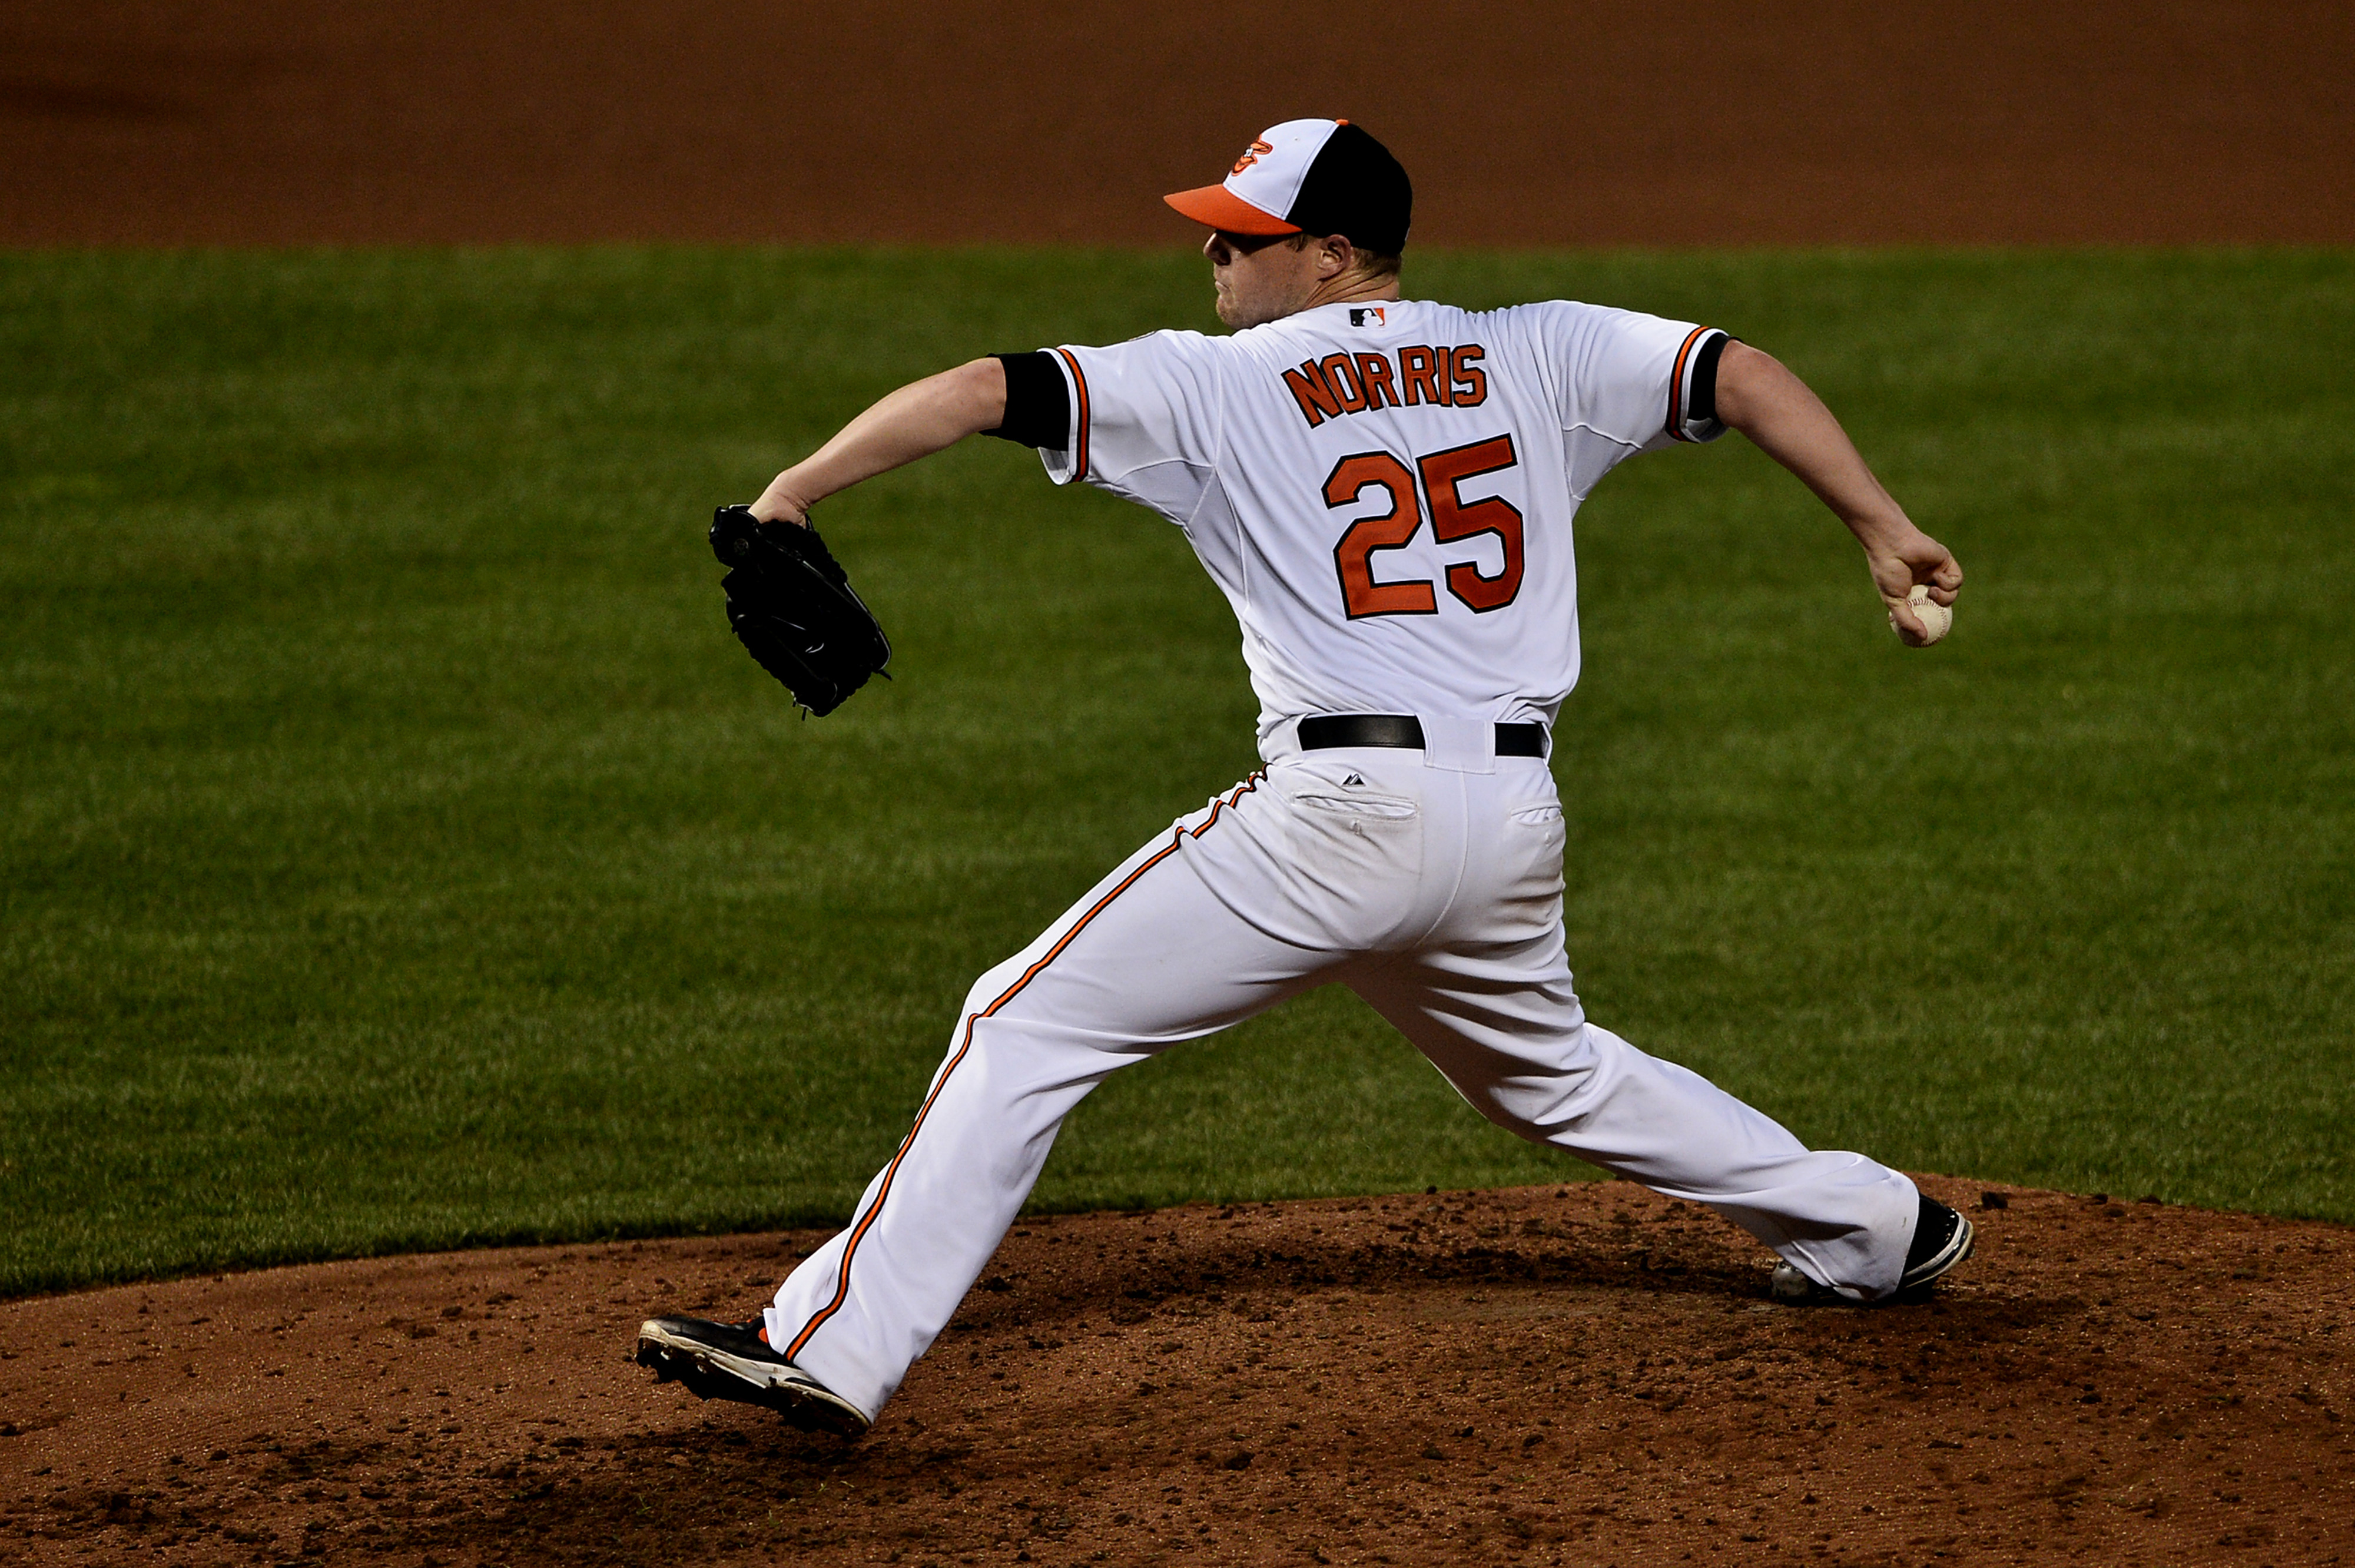 Bud Norris picked up a win in his O's debut.